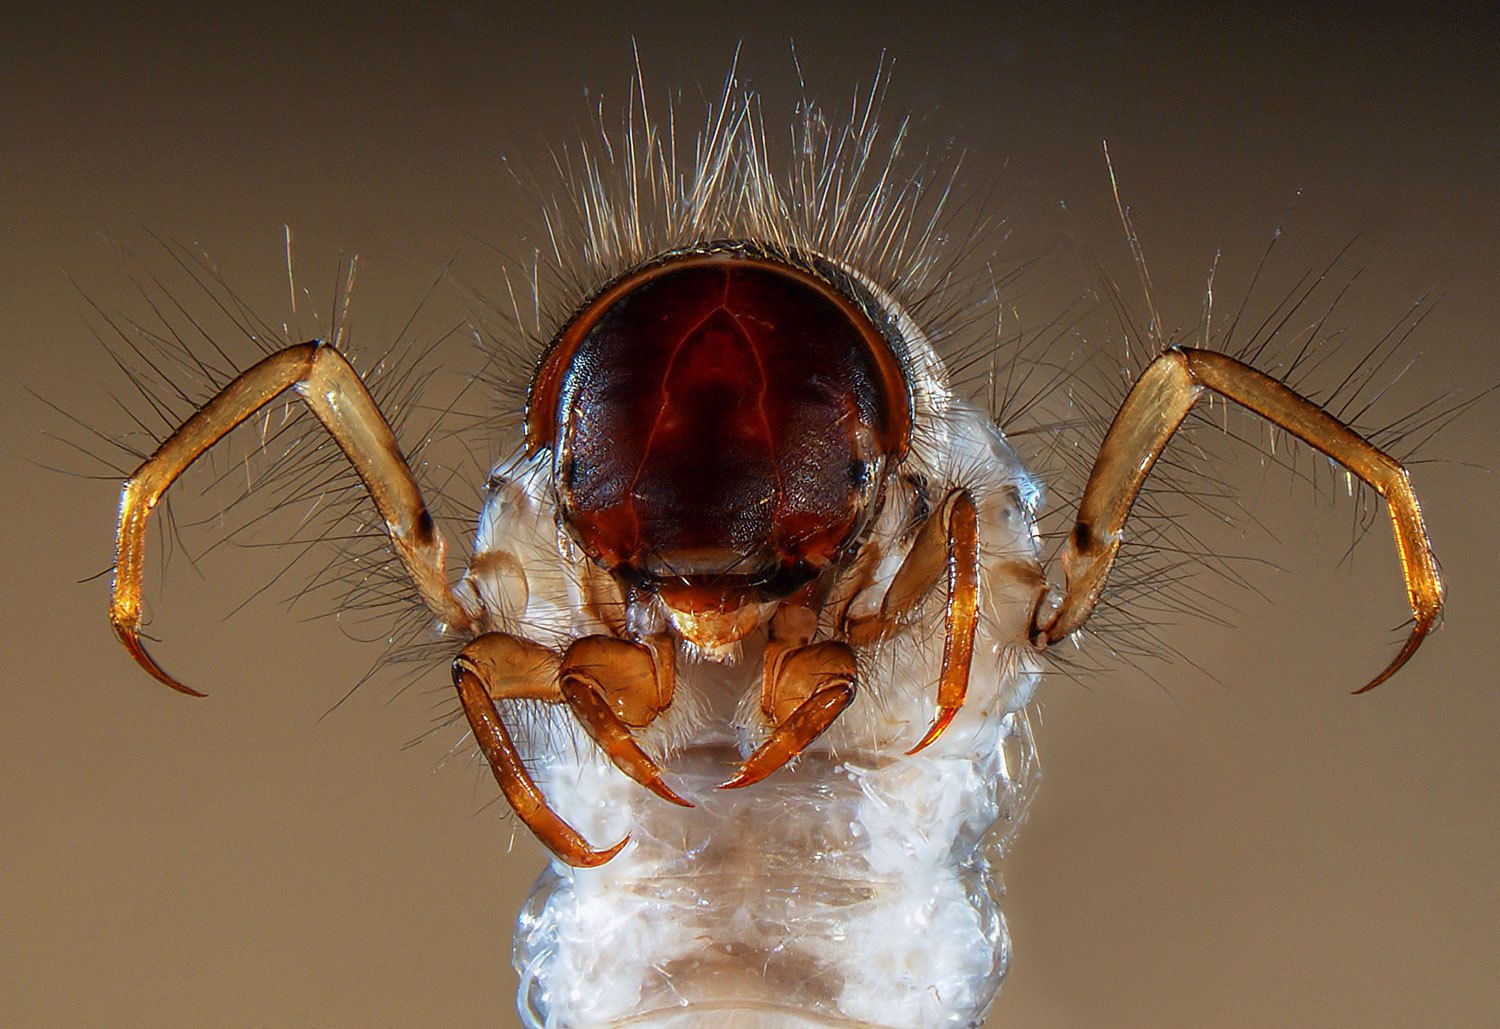 9th Place: Head and legs of a caddisfly larva.